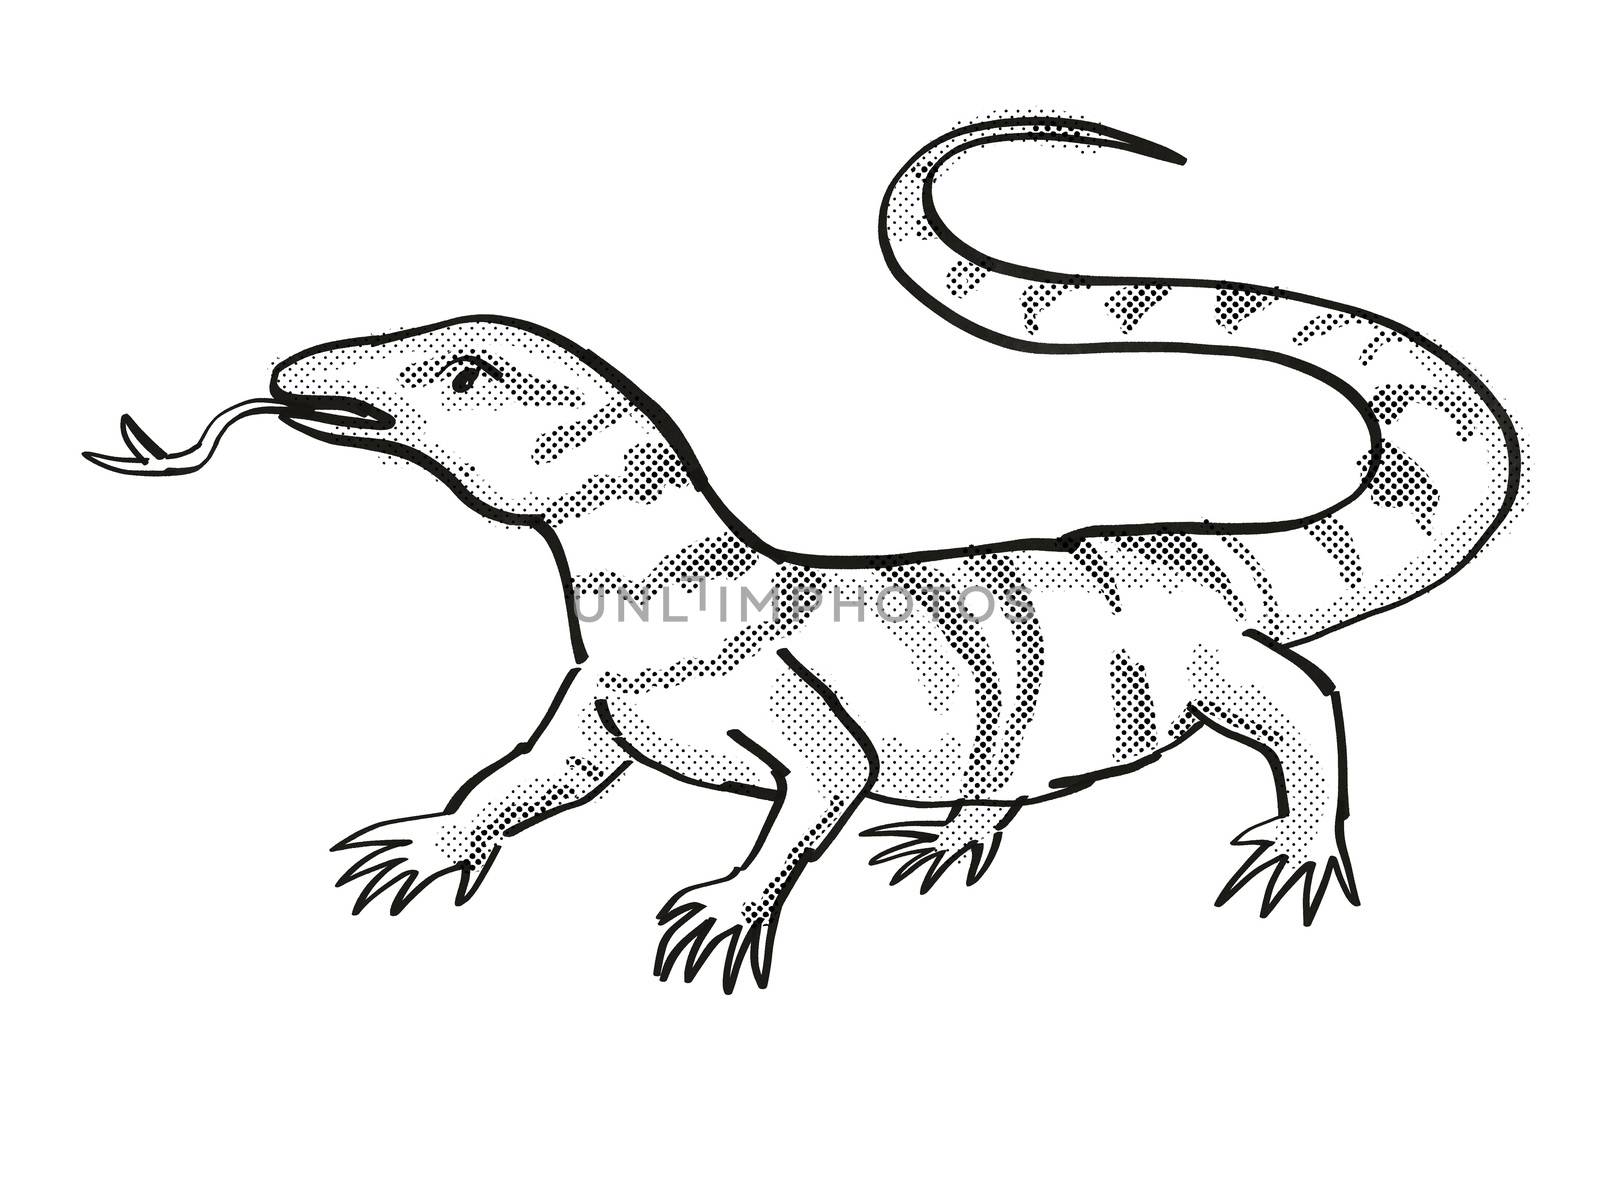 Retro cartoon line drawing style drawing of a Gray's Monitor, an endangered wildlife species on isolated background done in black and white full body.